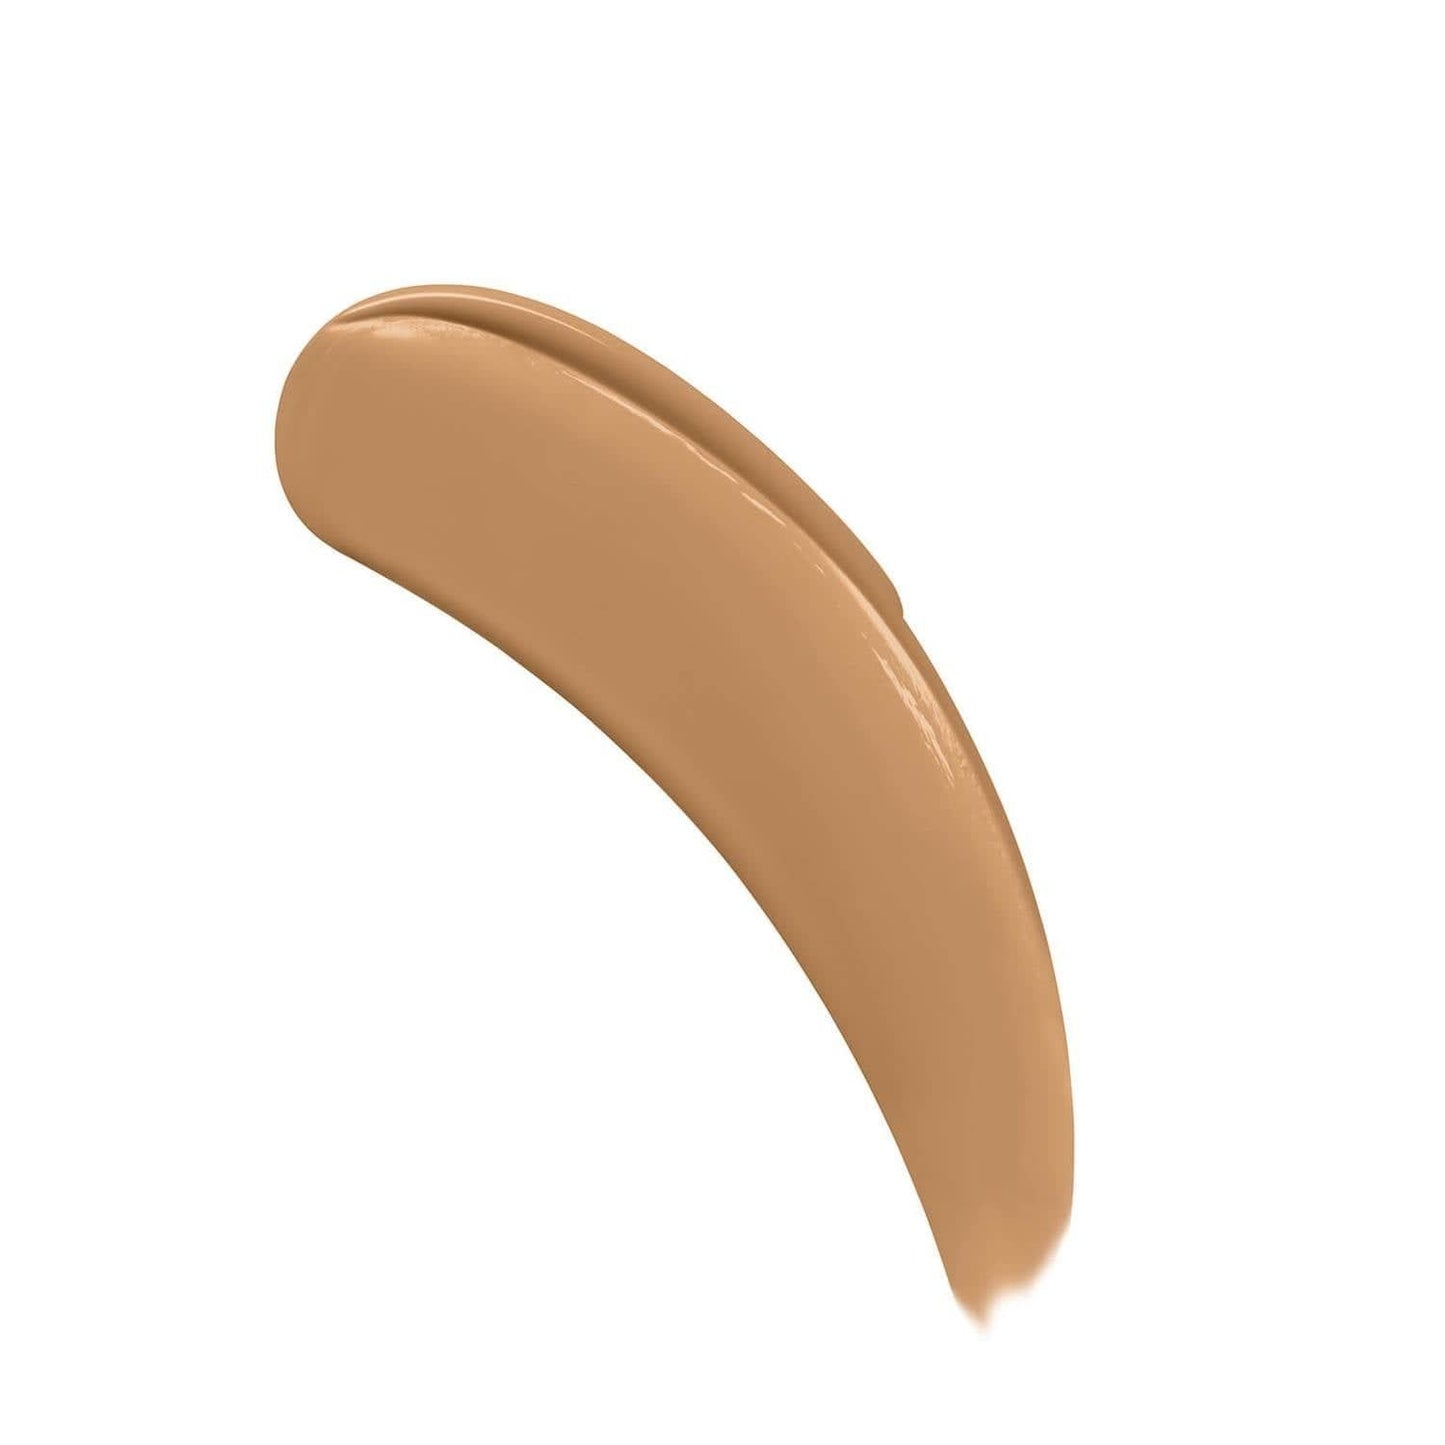 IT COSMETICS Beauty IT Cosmetics Your Skin But Better Foundation and Skincare 30ml - 42.5 Tan Warm